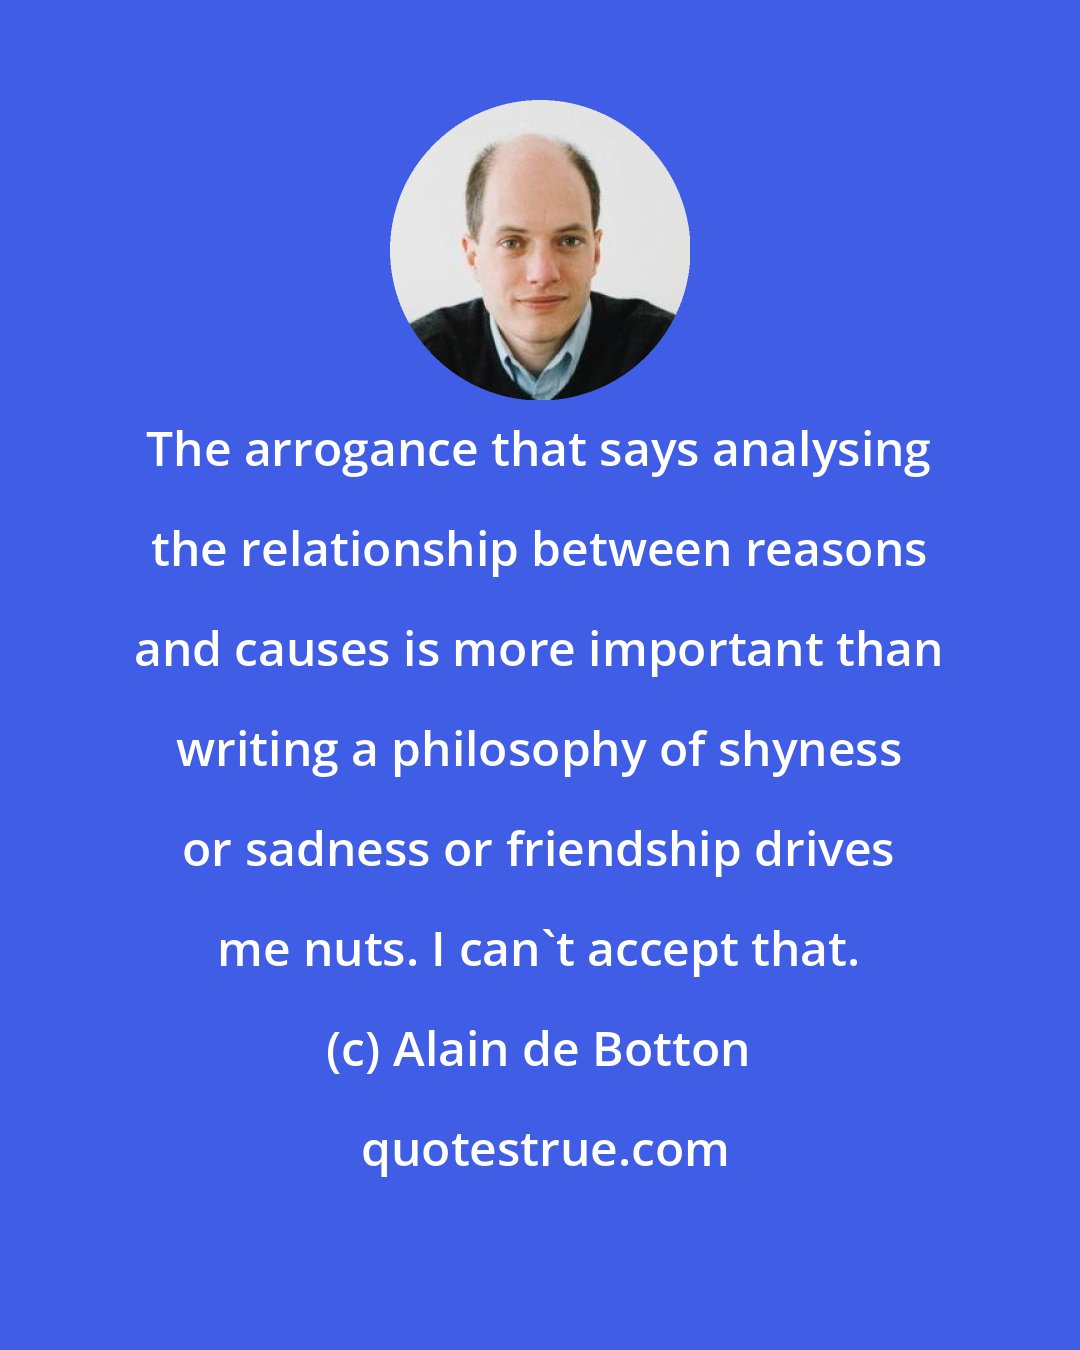 Alain de Botton: The arrogance that says analysing the relationship between reasons and causes is more important than writing a philosophy of shyness or sadness or friendship drives me nuts. I can't accept that.